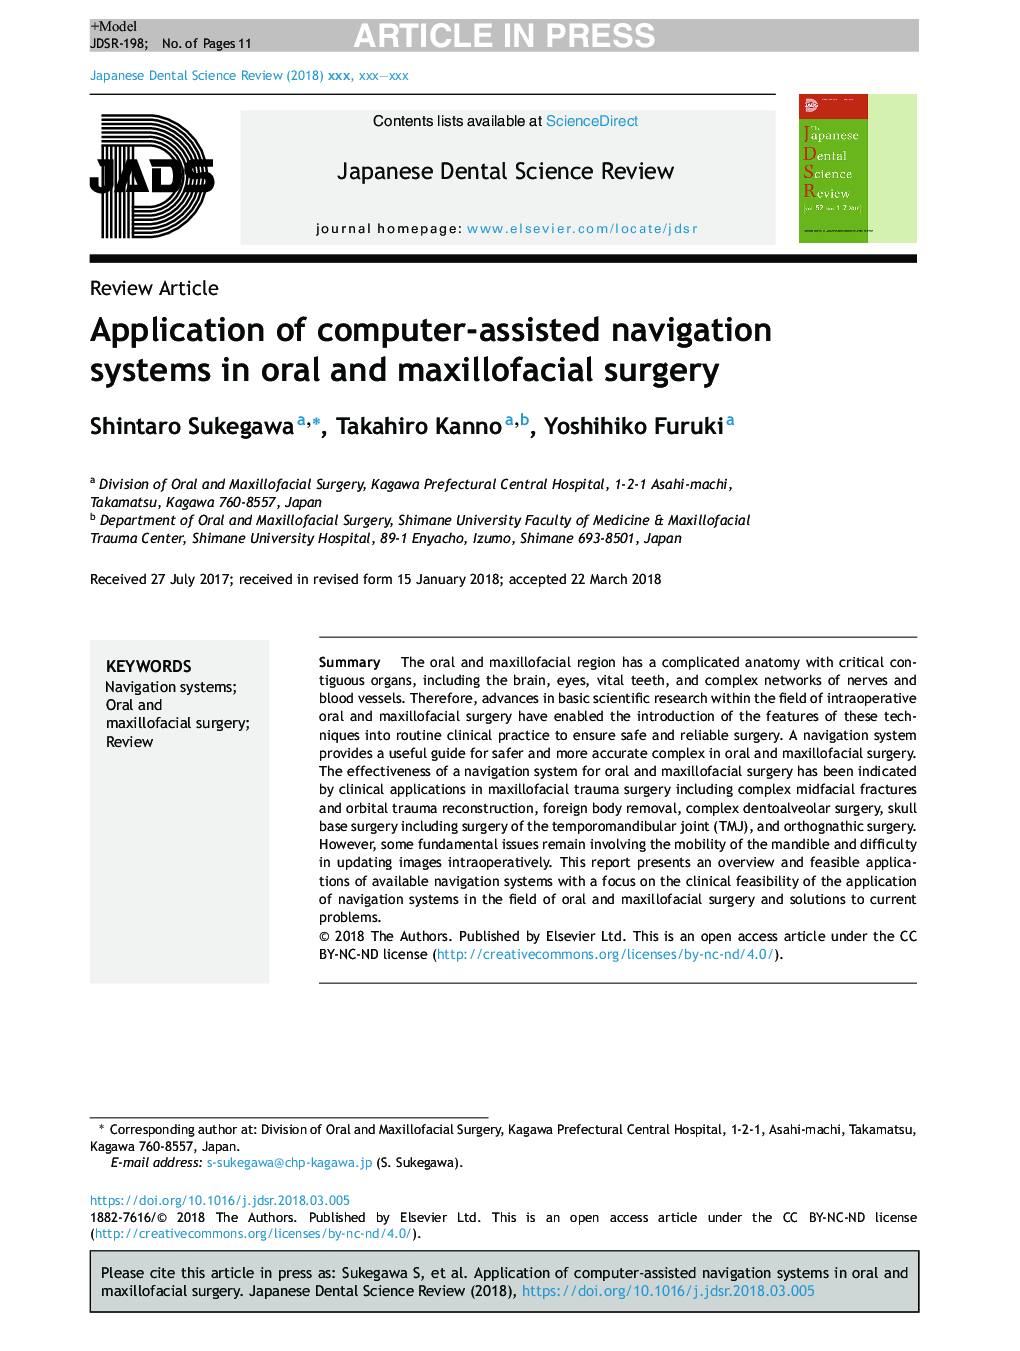 Application of computer-assisted navigation systems in oral and maxillofacial surgery